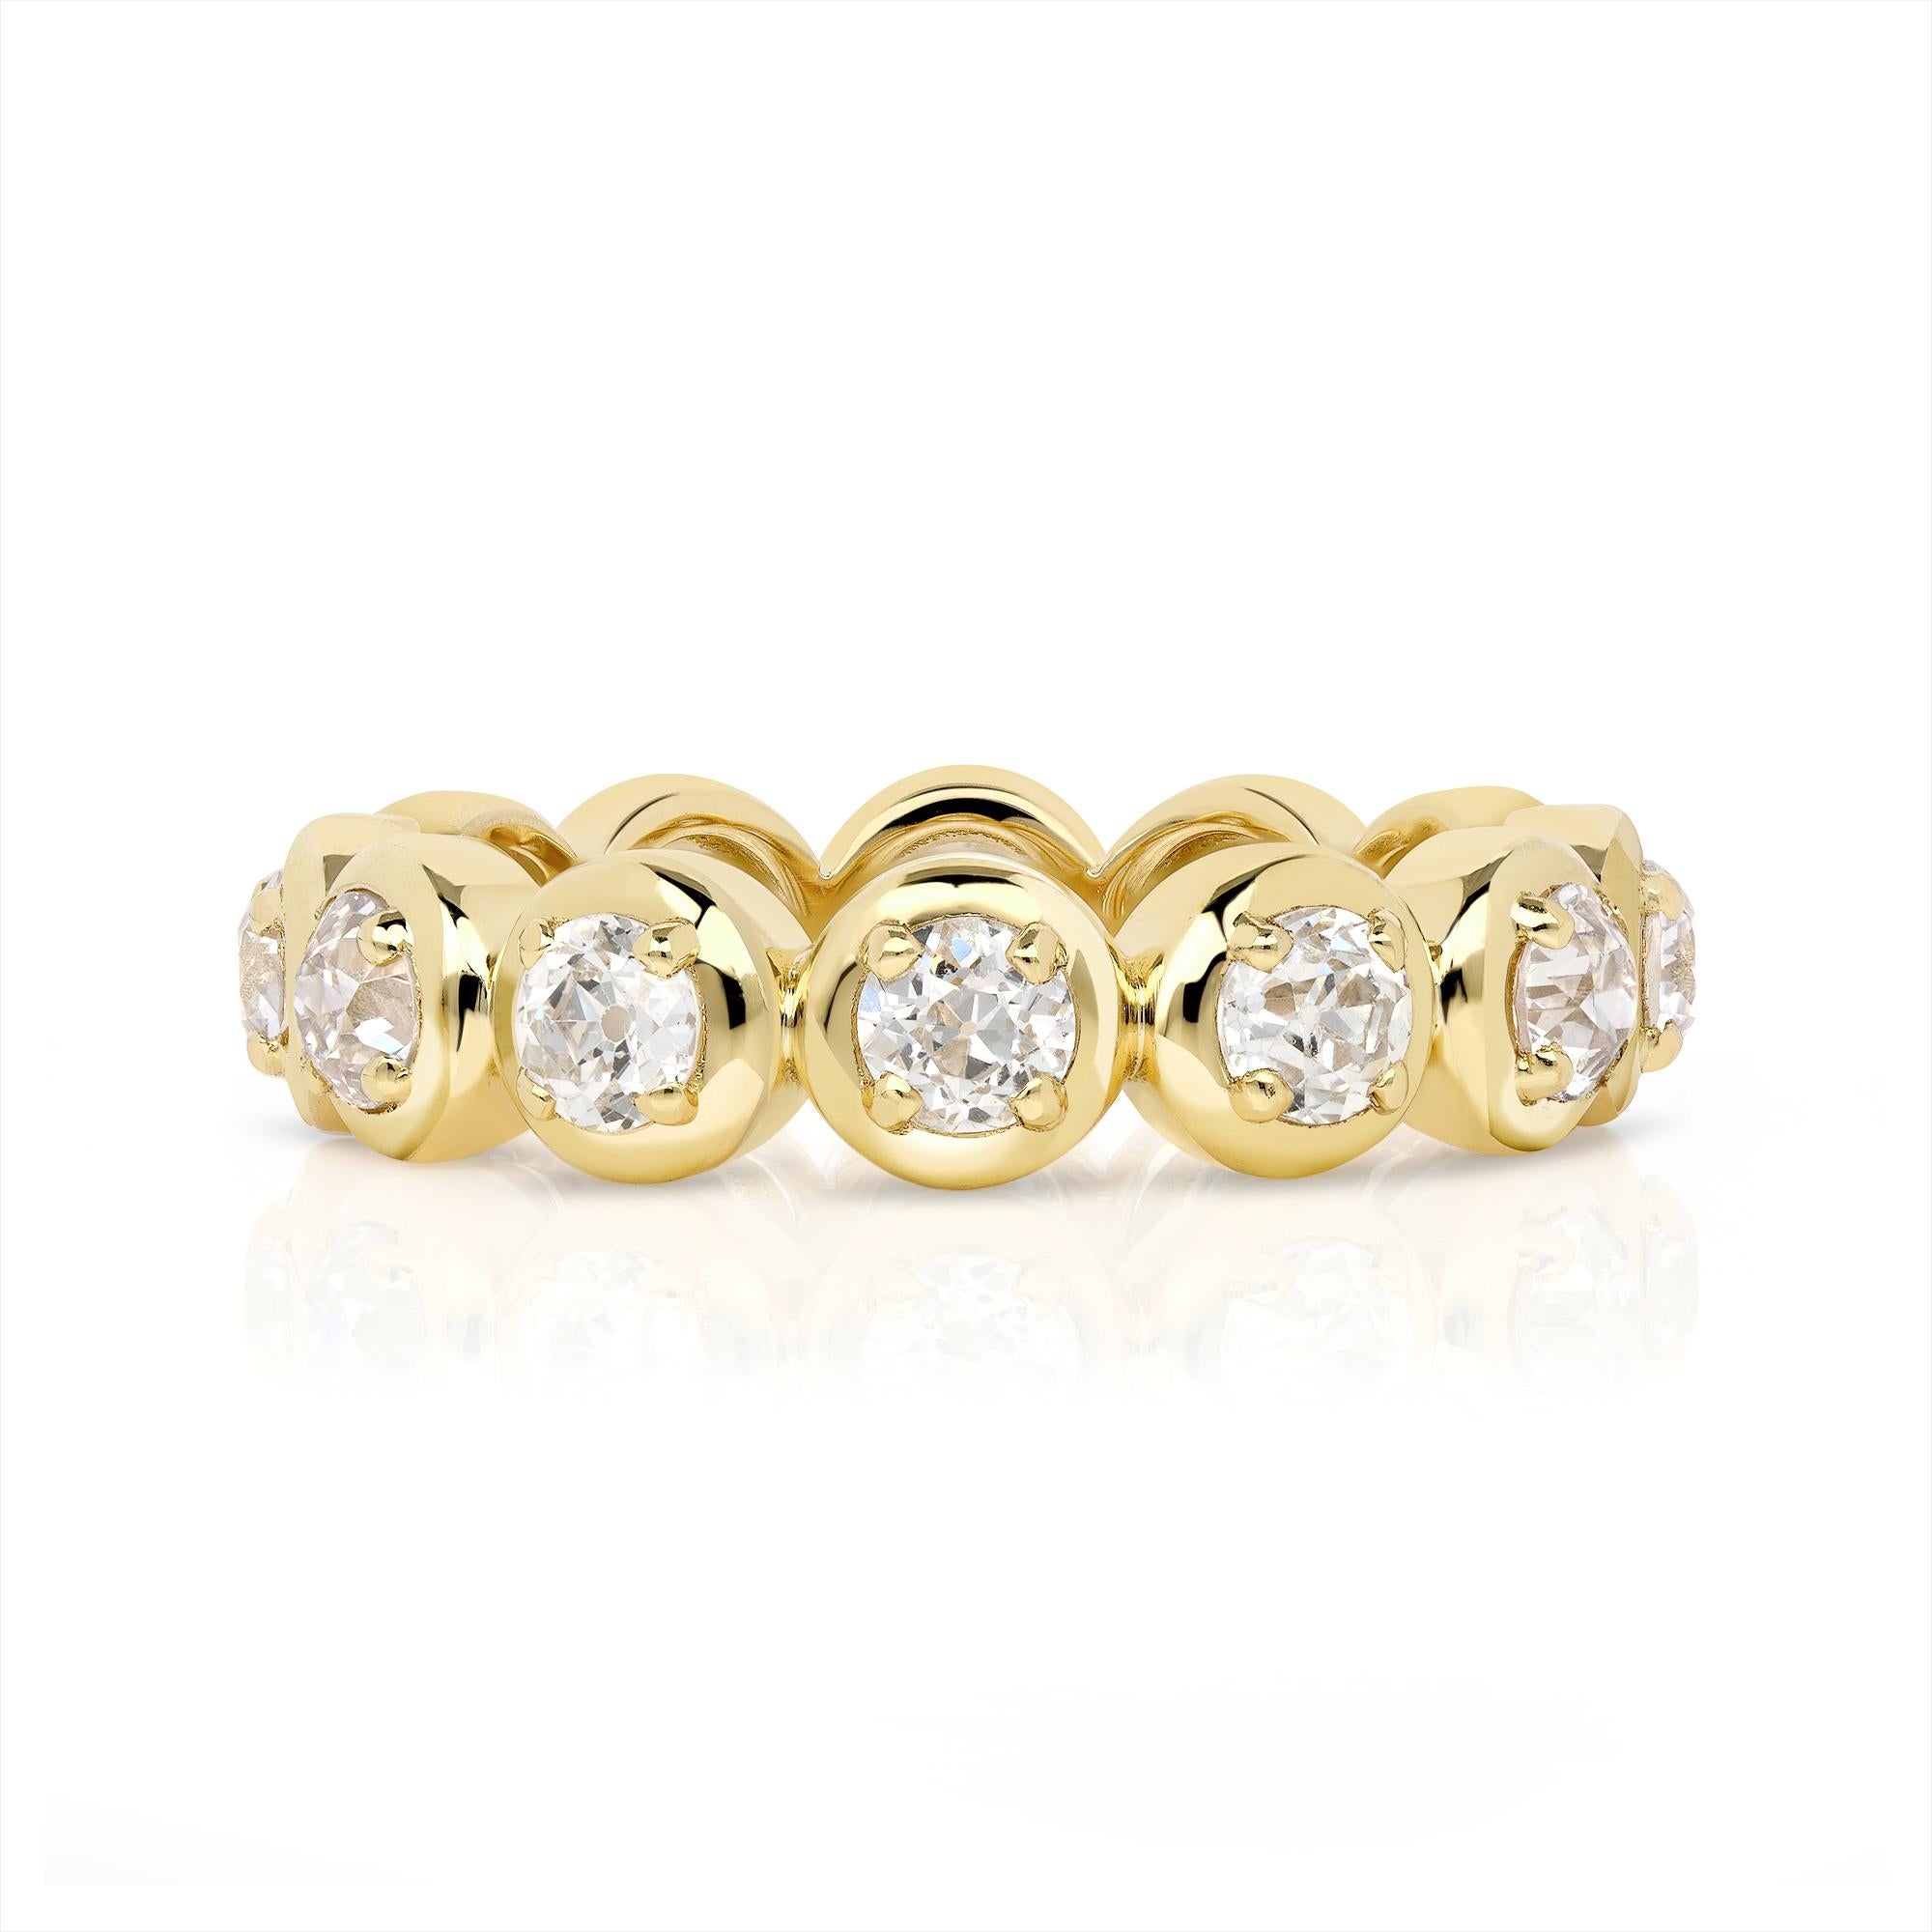 For Sale:  Handcrafted Randi Old European Cut Diamond Eternity Band by Single Stone 2